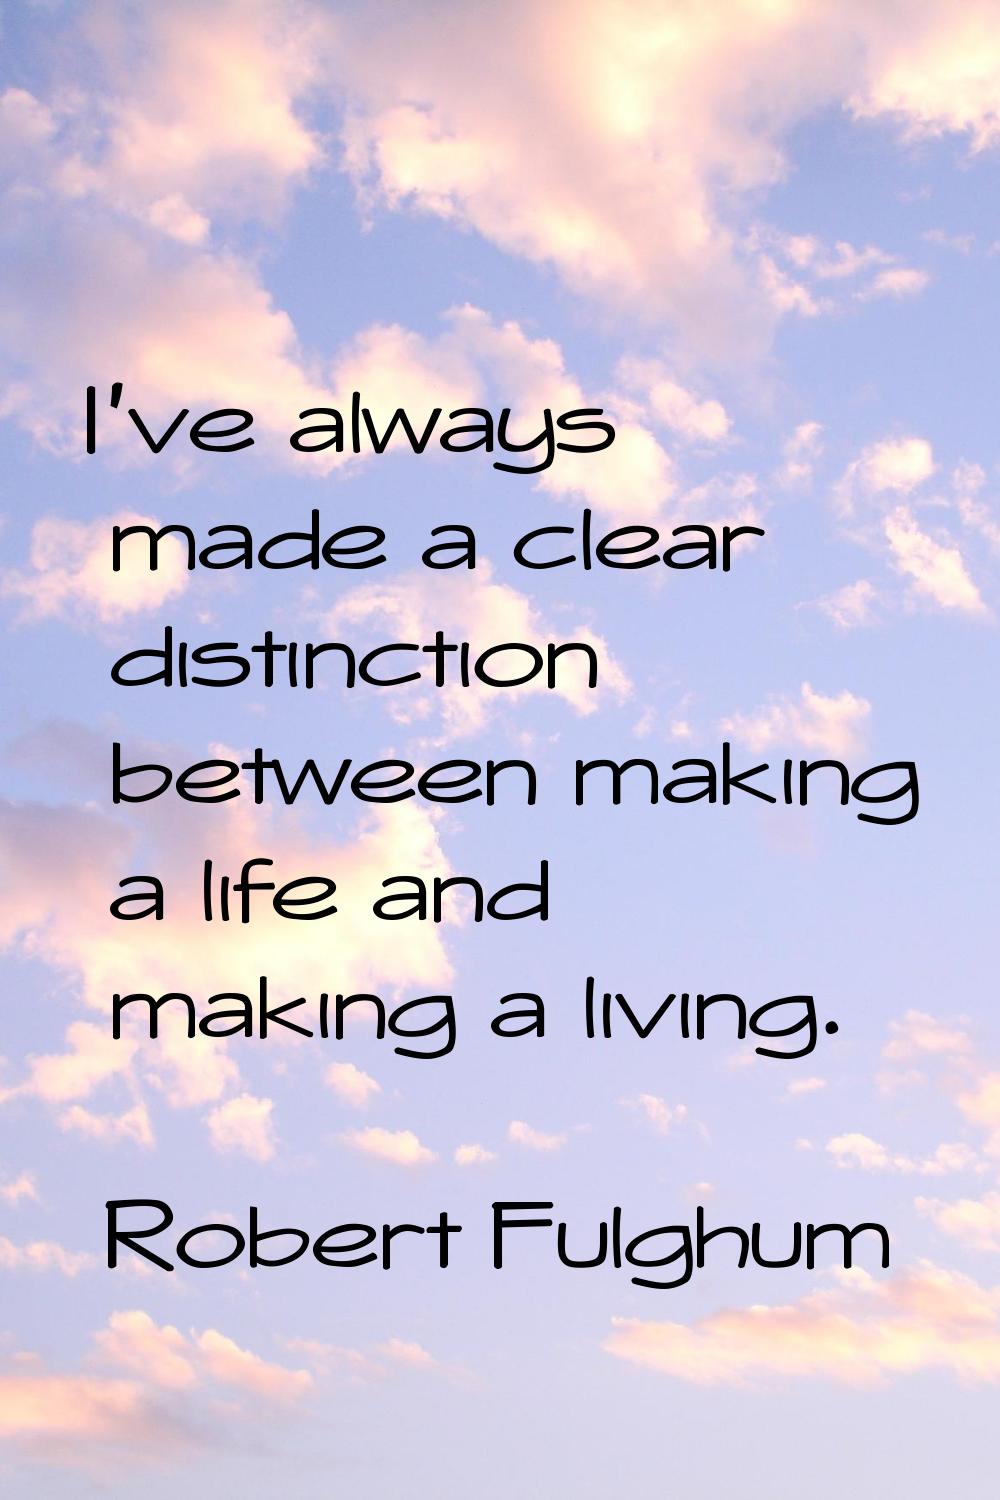 I've always made a clear distinction between making a life and making a living.